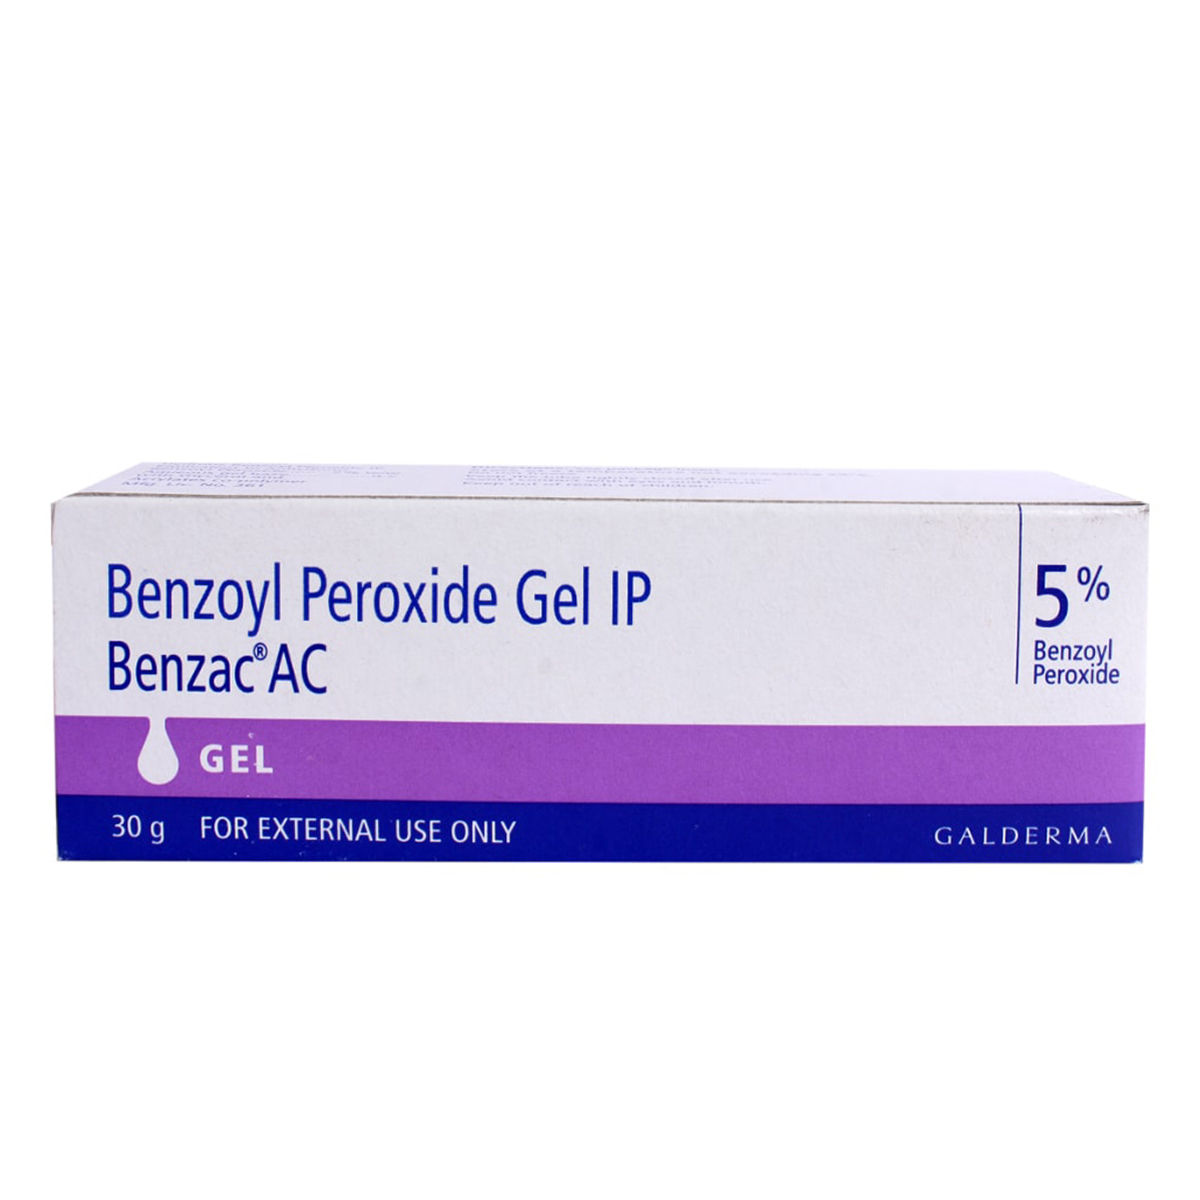 rense tårn hundrede Benzac AC 5% Gel 30 gm Price, Uses, Side Effects, Composition - Apollo  Pharmacy